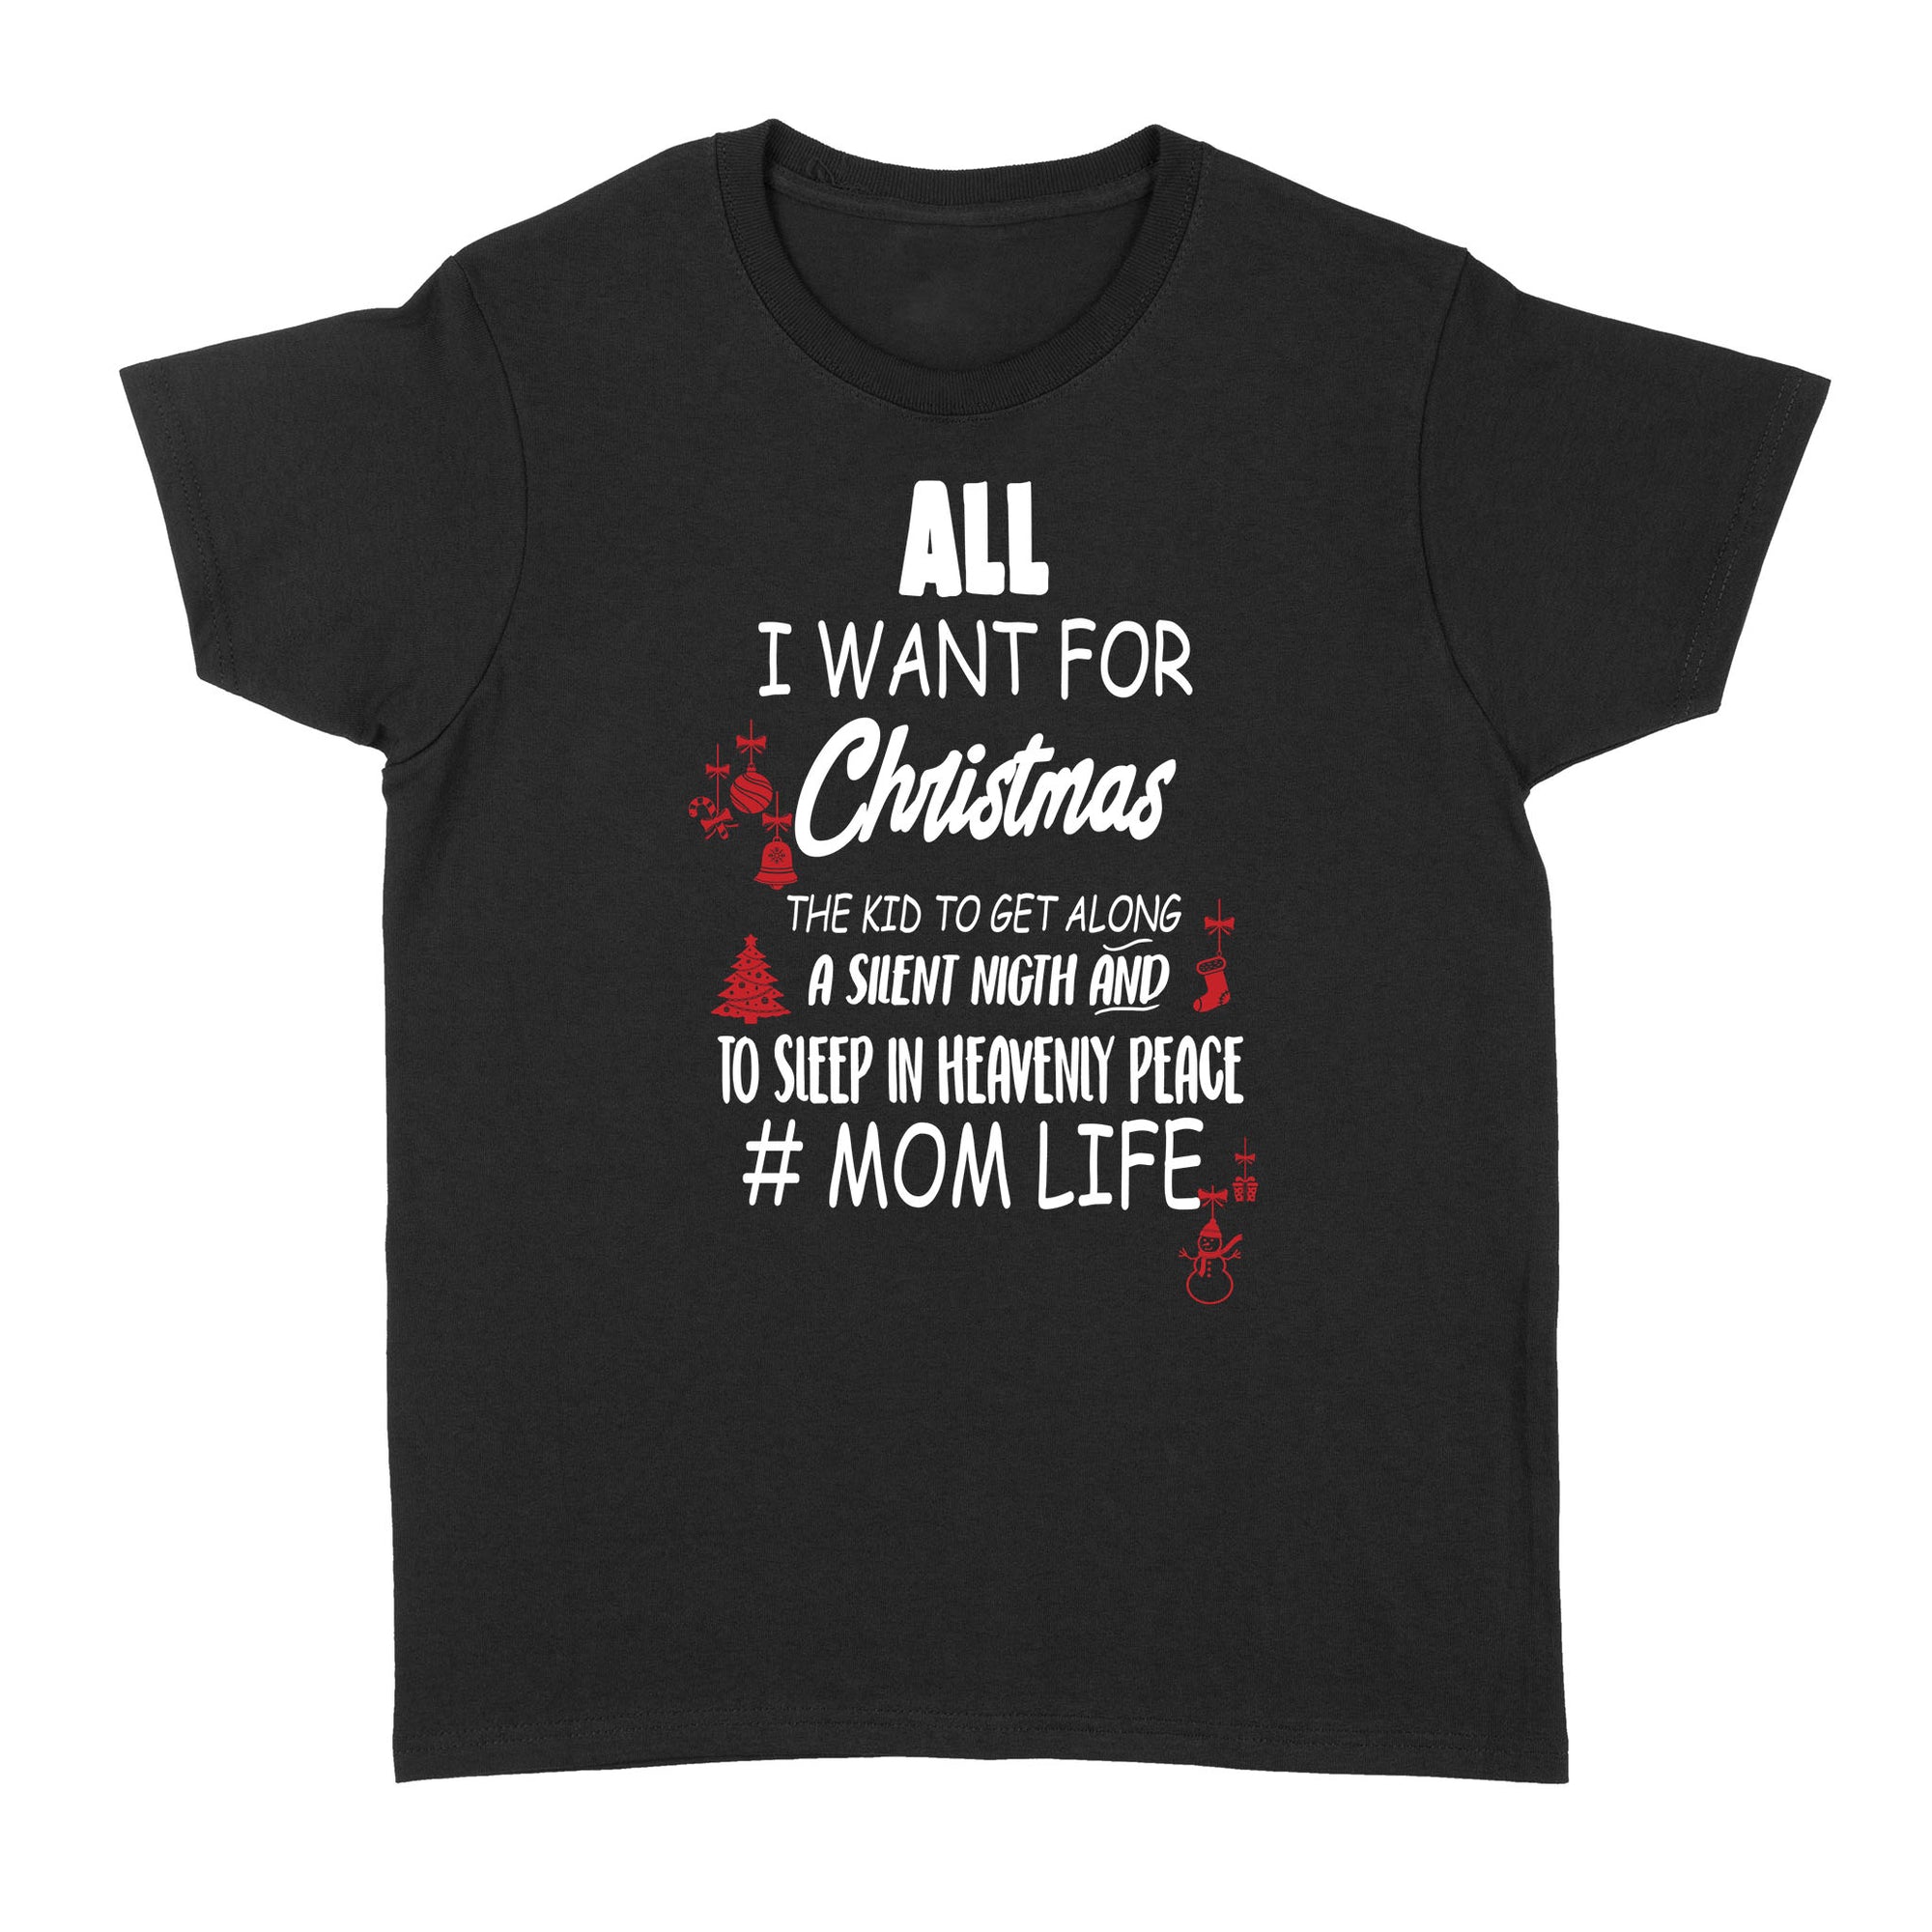 Gift Ideas for Mom Mothers Day All I Want For Christmas The Kid To Get Along A Silent Night And To Sleep In Mom Life - Standard Women's T-shirt